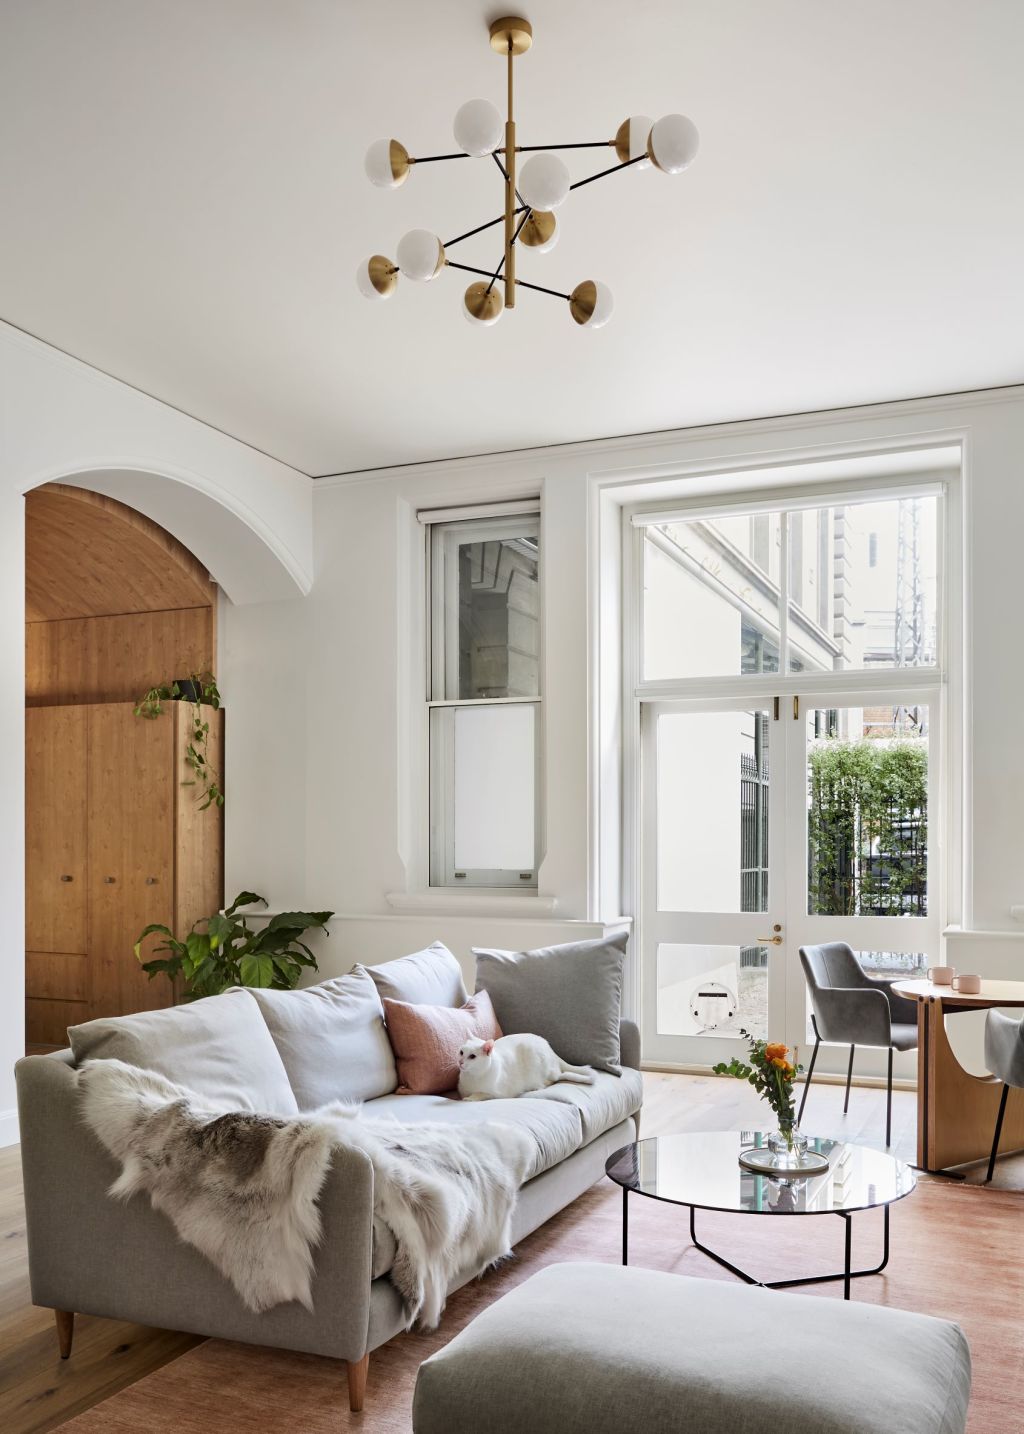 Taking every advantage to make a small Melbourne apartment amenable. Photo: Tess Kelly